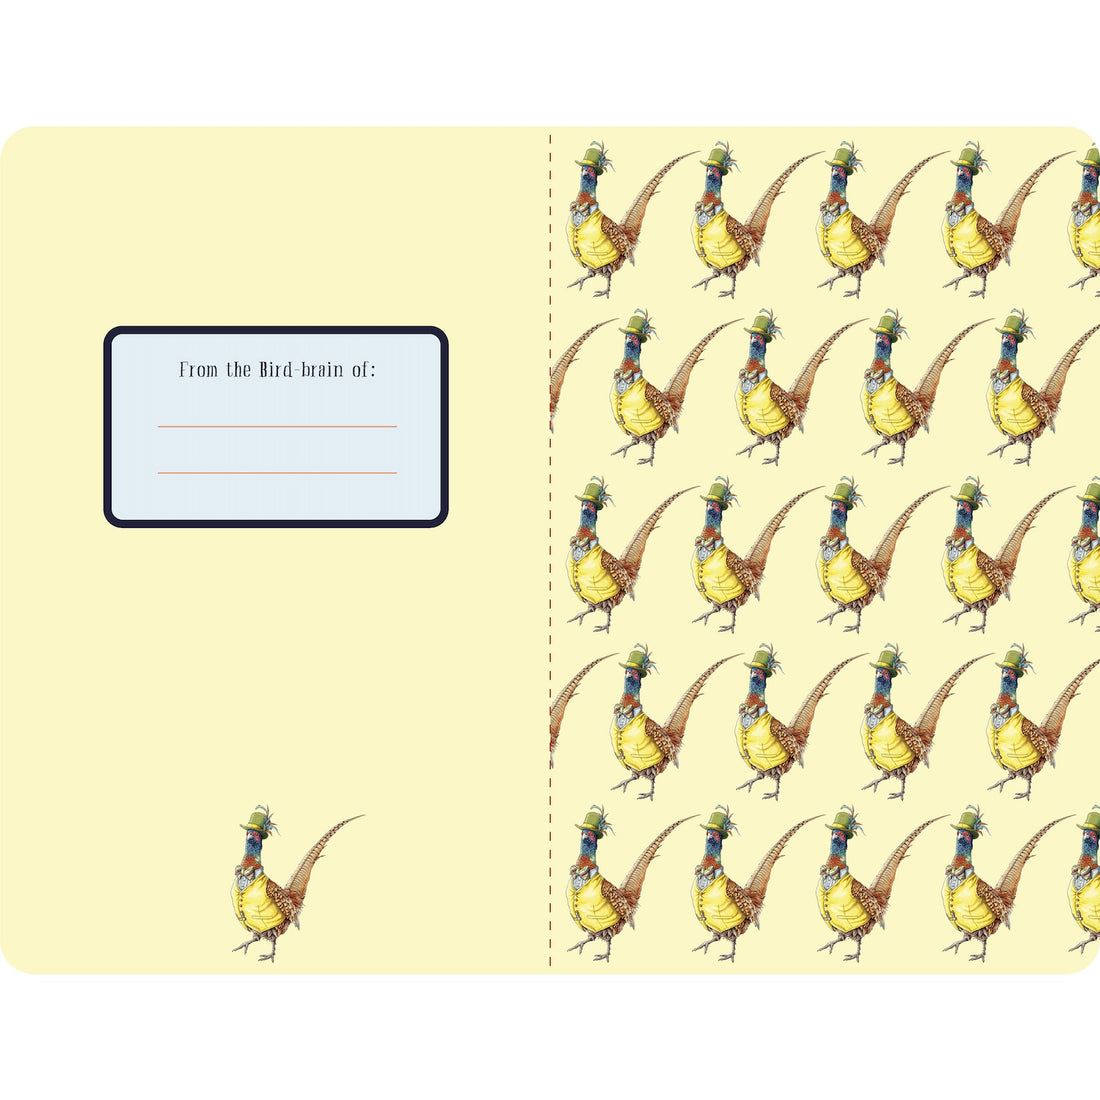 The inside front and back covers of the Magnipheasant Ideas Notebook is light yellow, with a rectangle in the front titled &quot;From the Bird-brain of:&quot; with two blank lines, and a single pheasant illustration below. The back inside cover features a repeating pattern of the pheasant illustration.